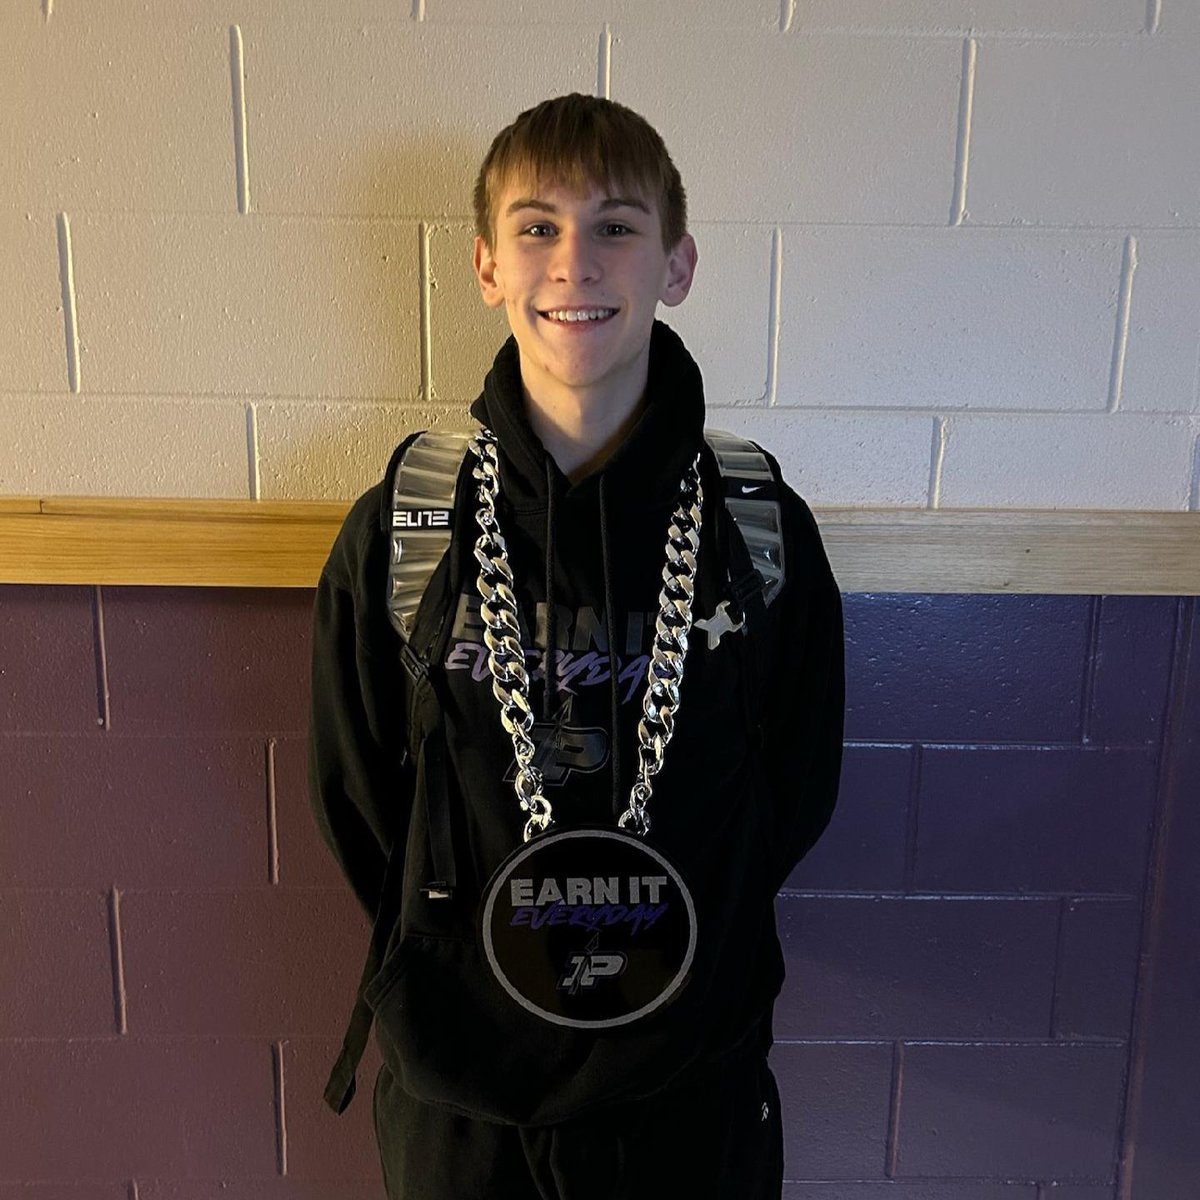 Congratulations to @JordanGassman11 for earning the 'Charge Chain' once again during our win vs Fulton. #EarnItEveryday